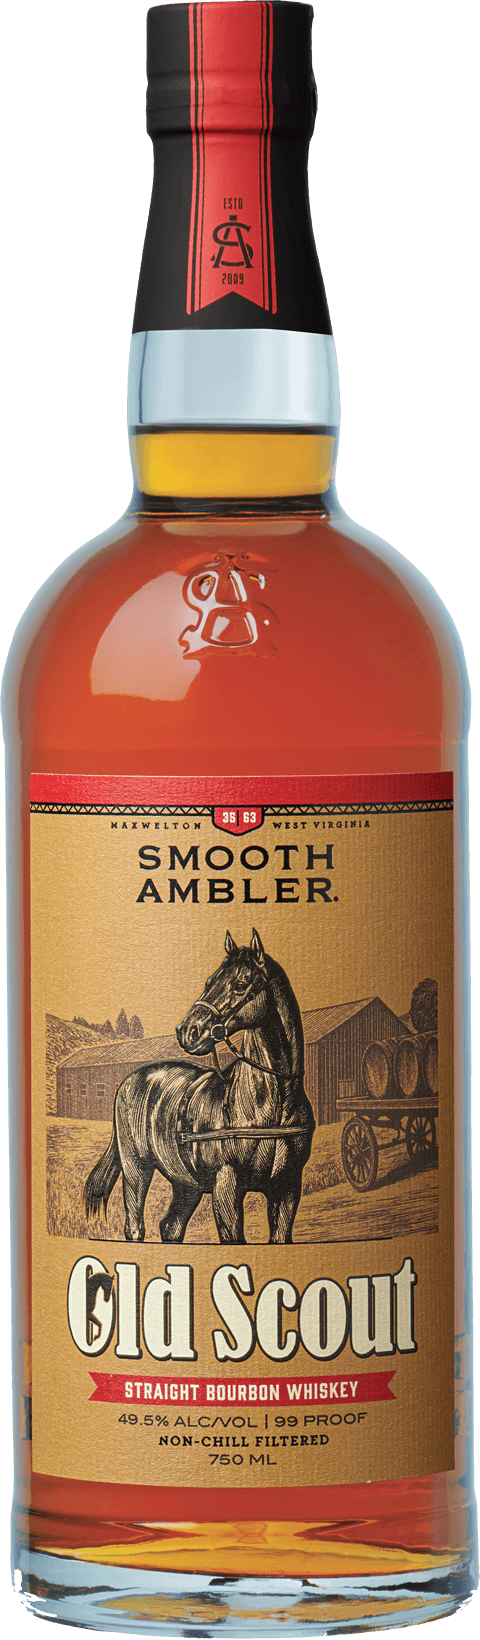 smooth-ambler-old-scout-straight-bourbon-whiskey-page-bottle